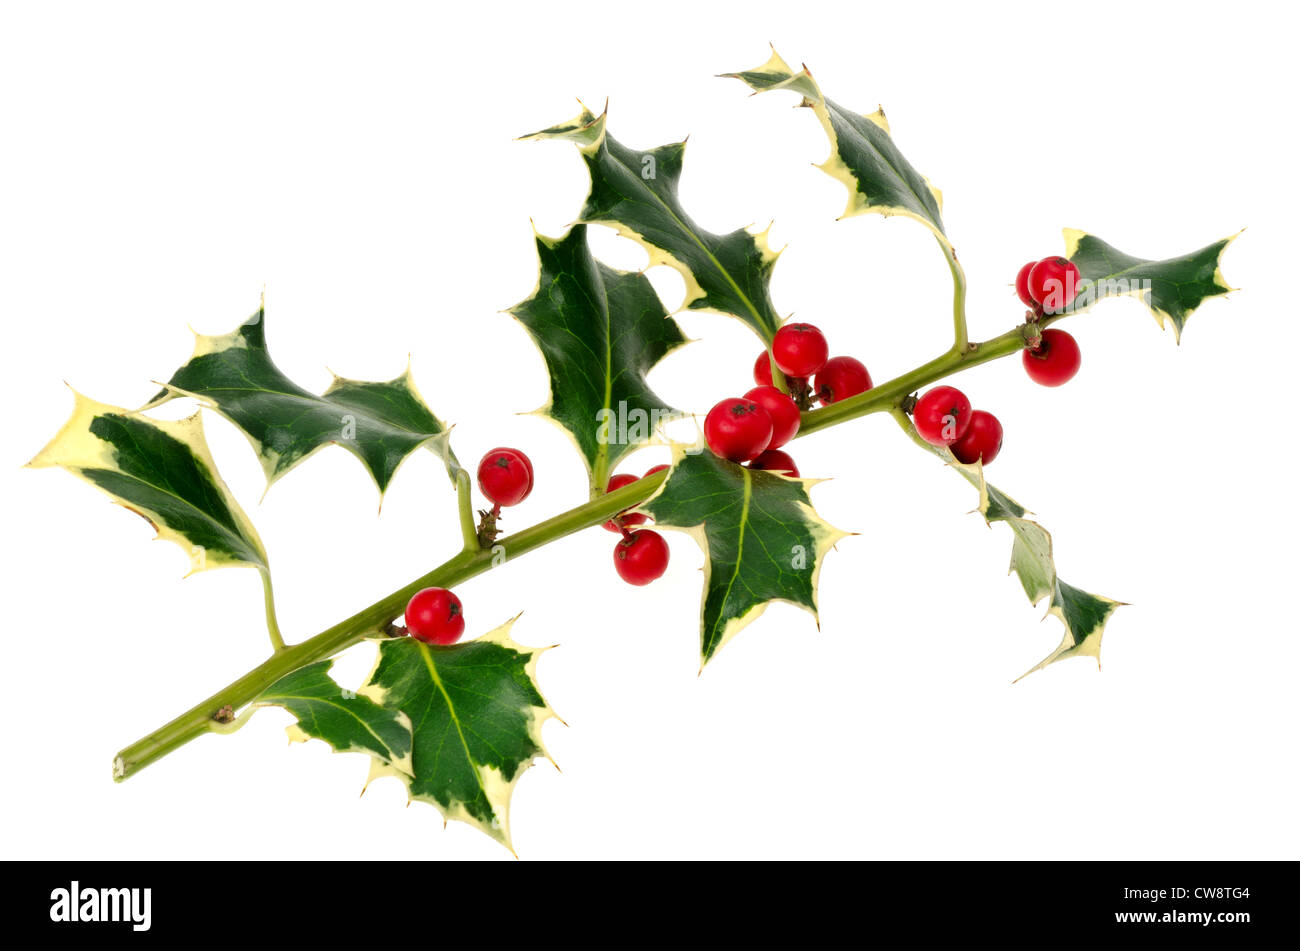 Sprig of holly with red berries - studio shot with a white background Stock Photo